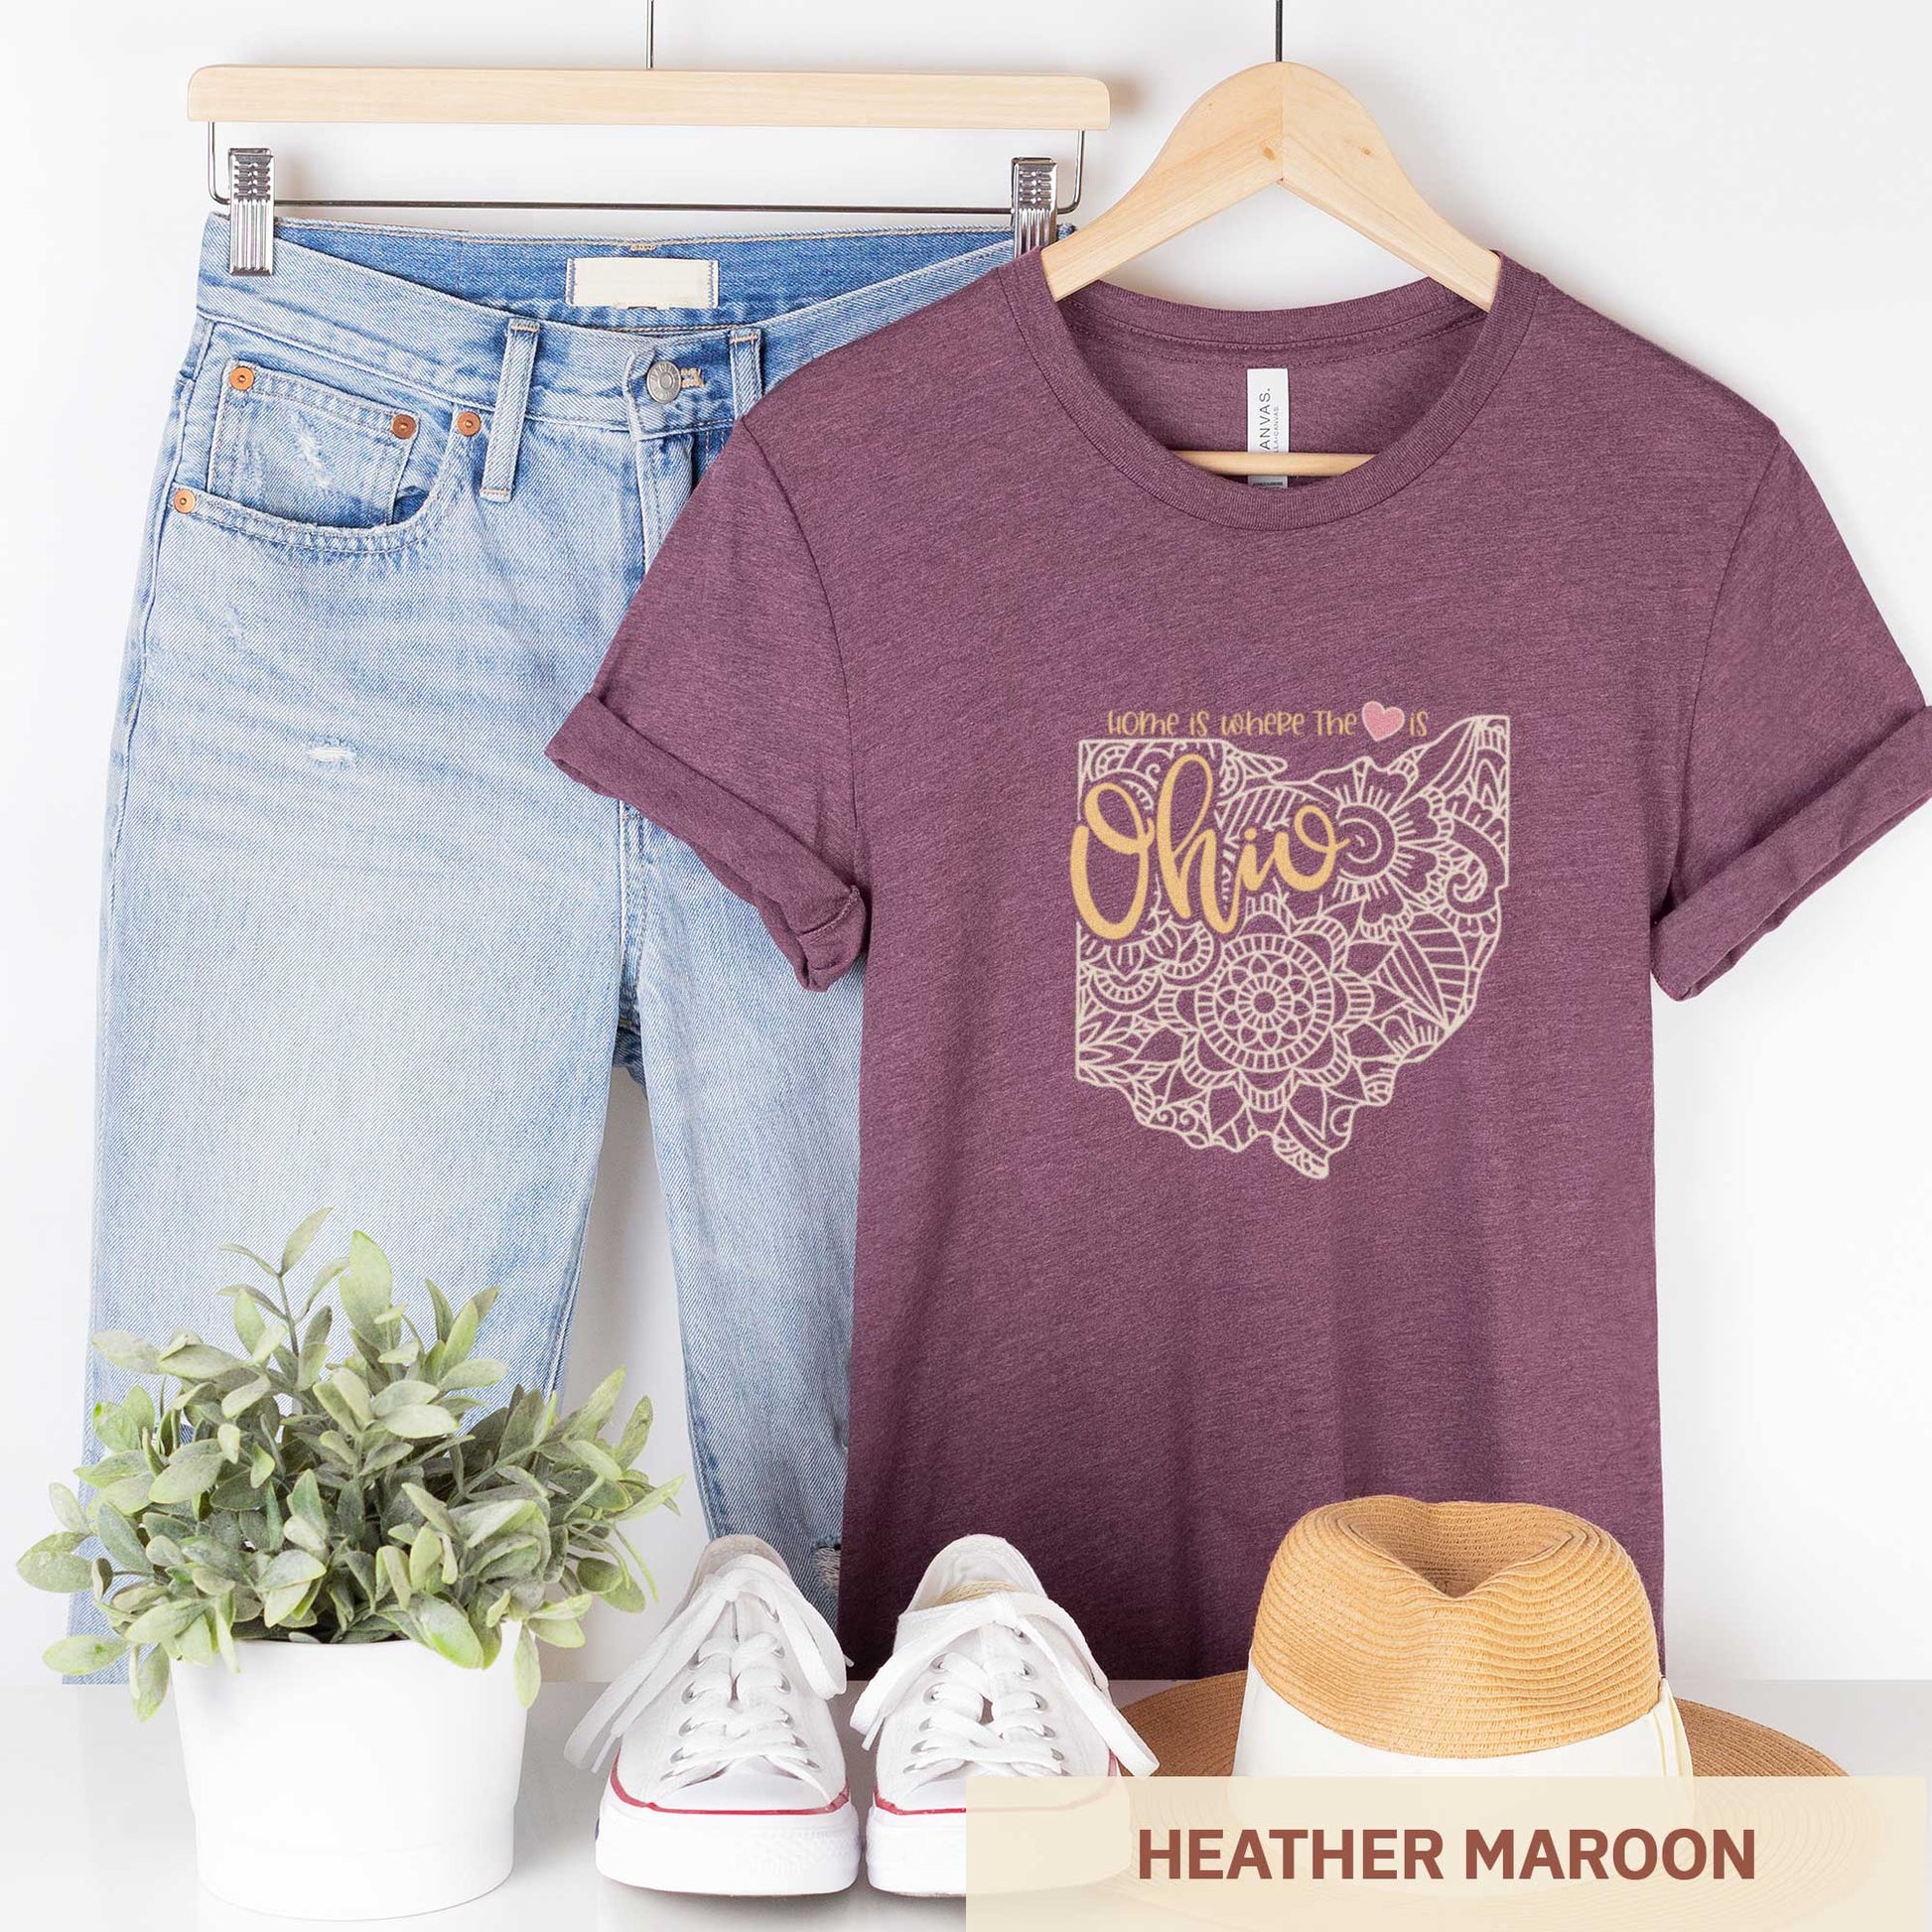 A hanging heather maroon Bella Canvas t-shirt featuring a mandala in the shape of Ohio with the words home is where the heart is.